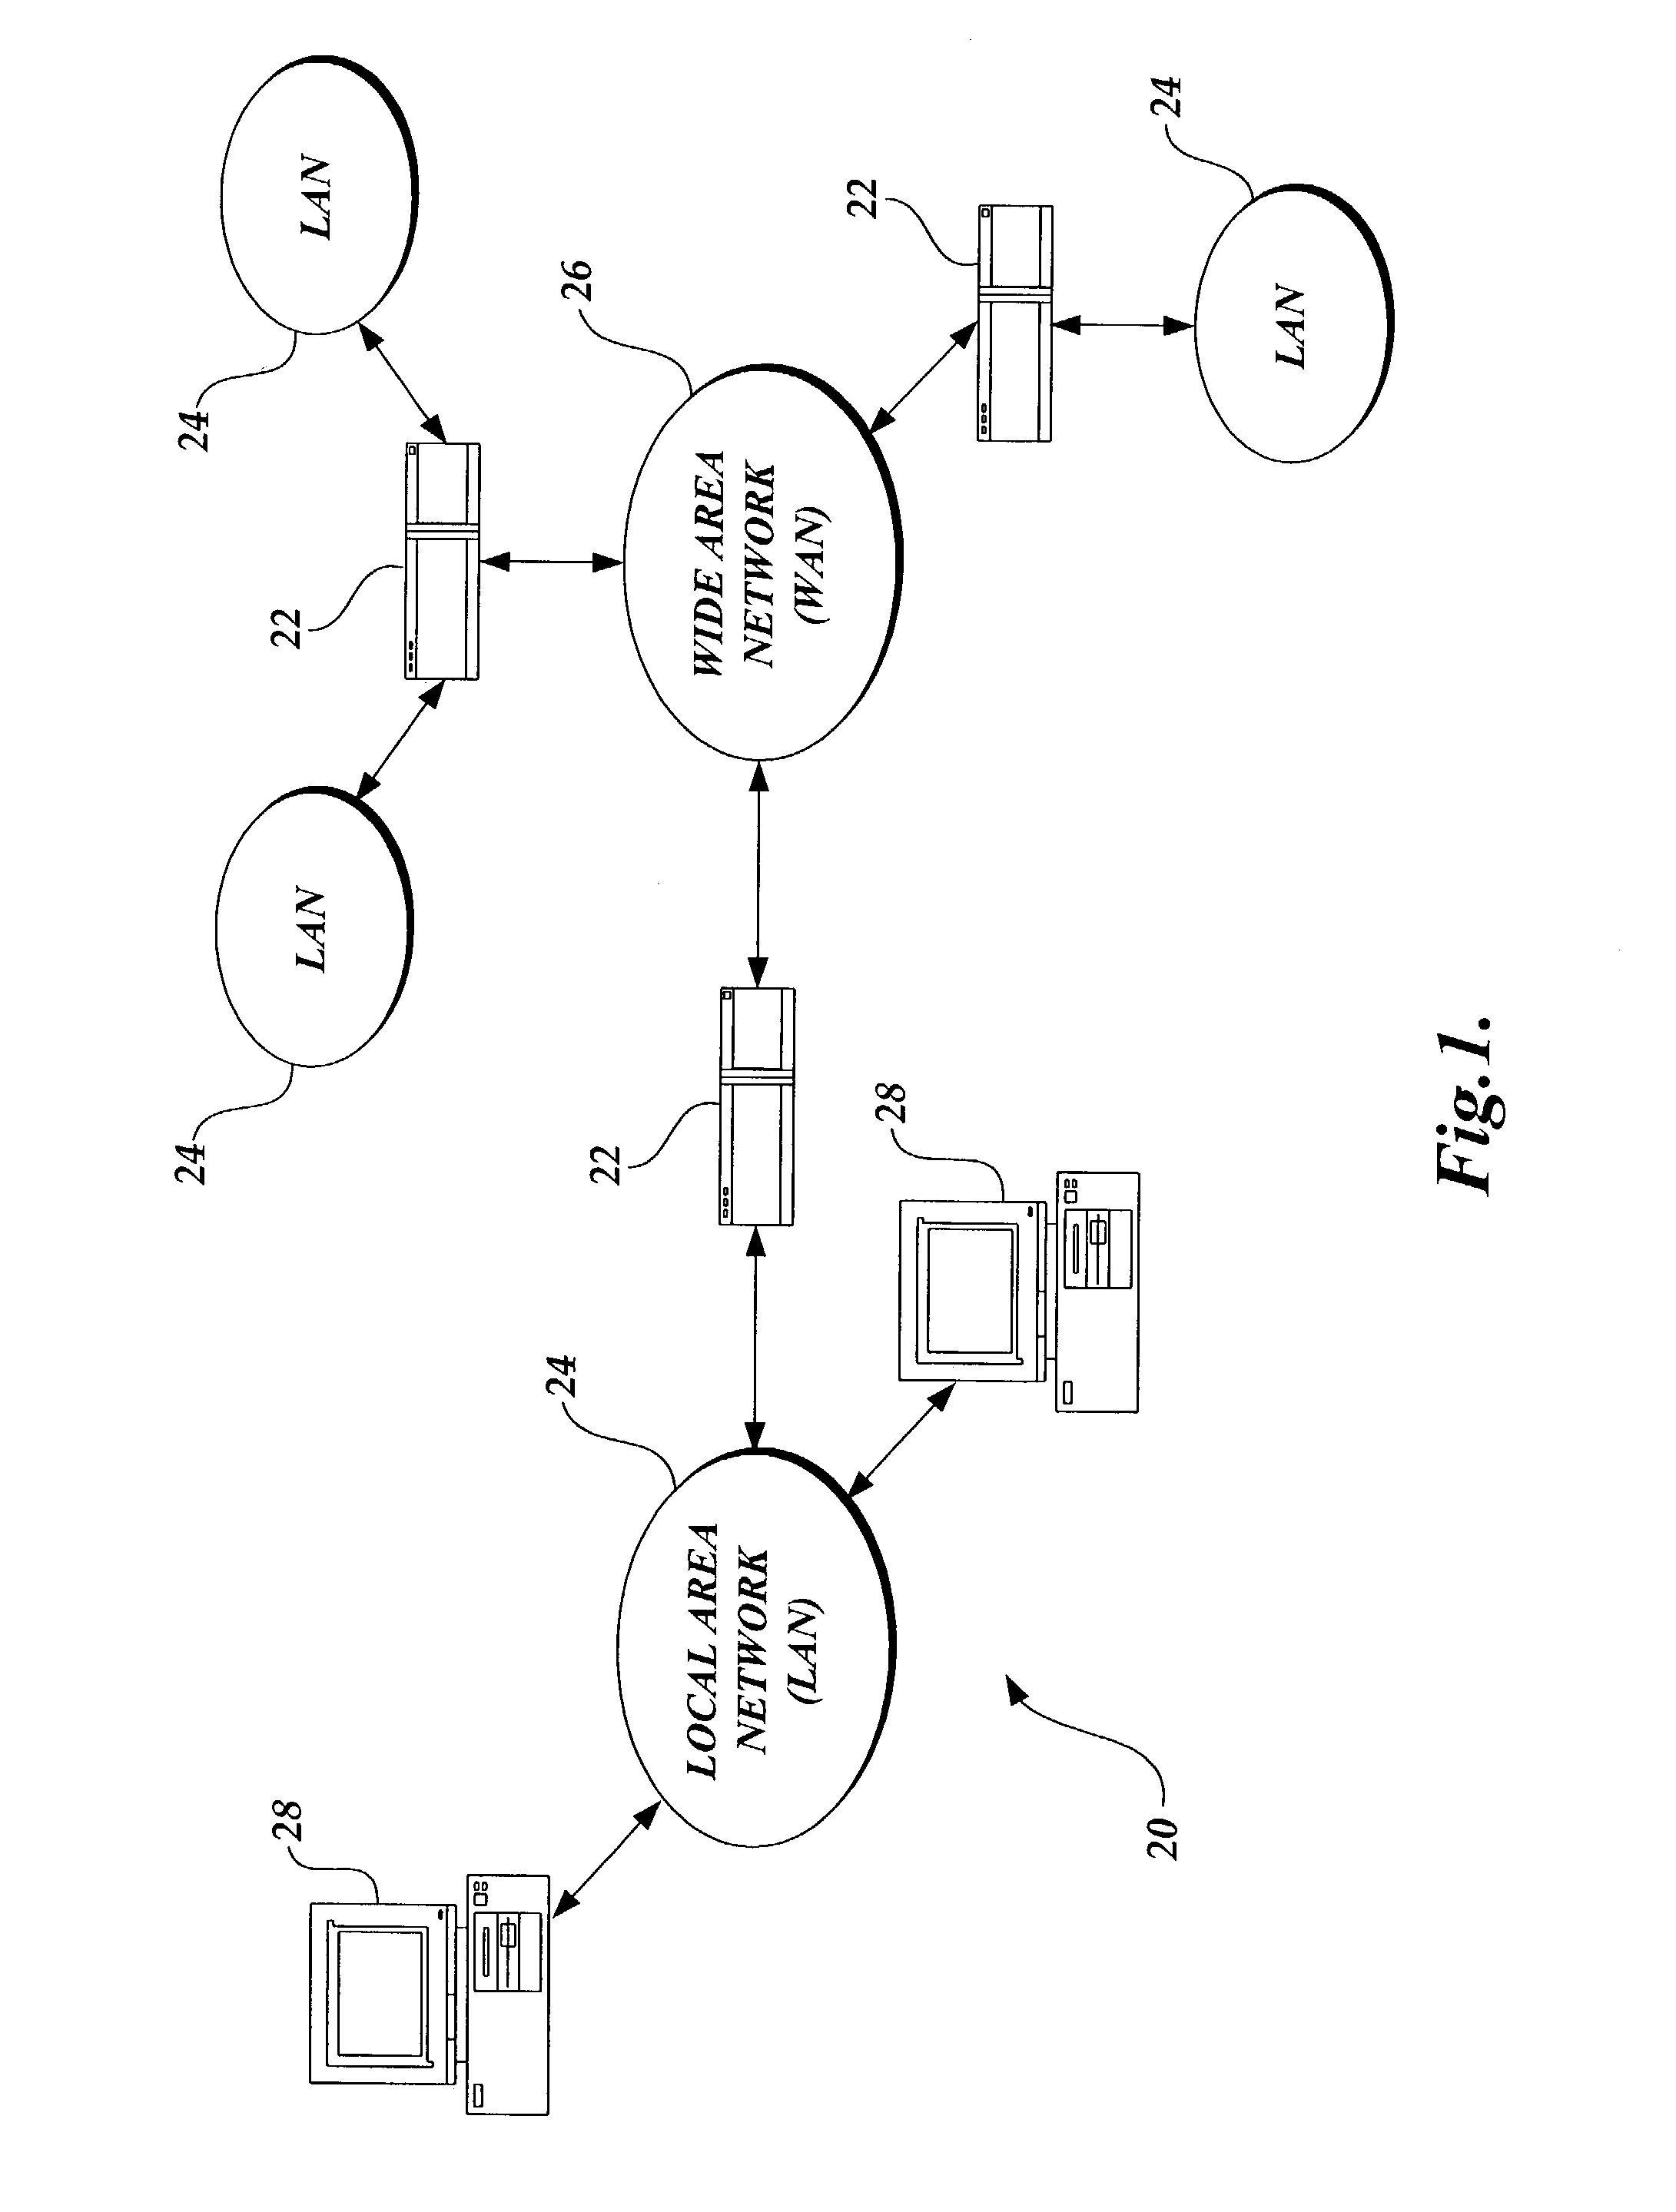 System for providing fault tolerant data warehousing environment by temporary transmitting data to alternate data warehouse during an interval of primary data warehouse failure